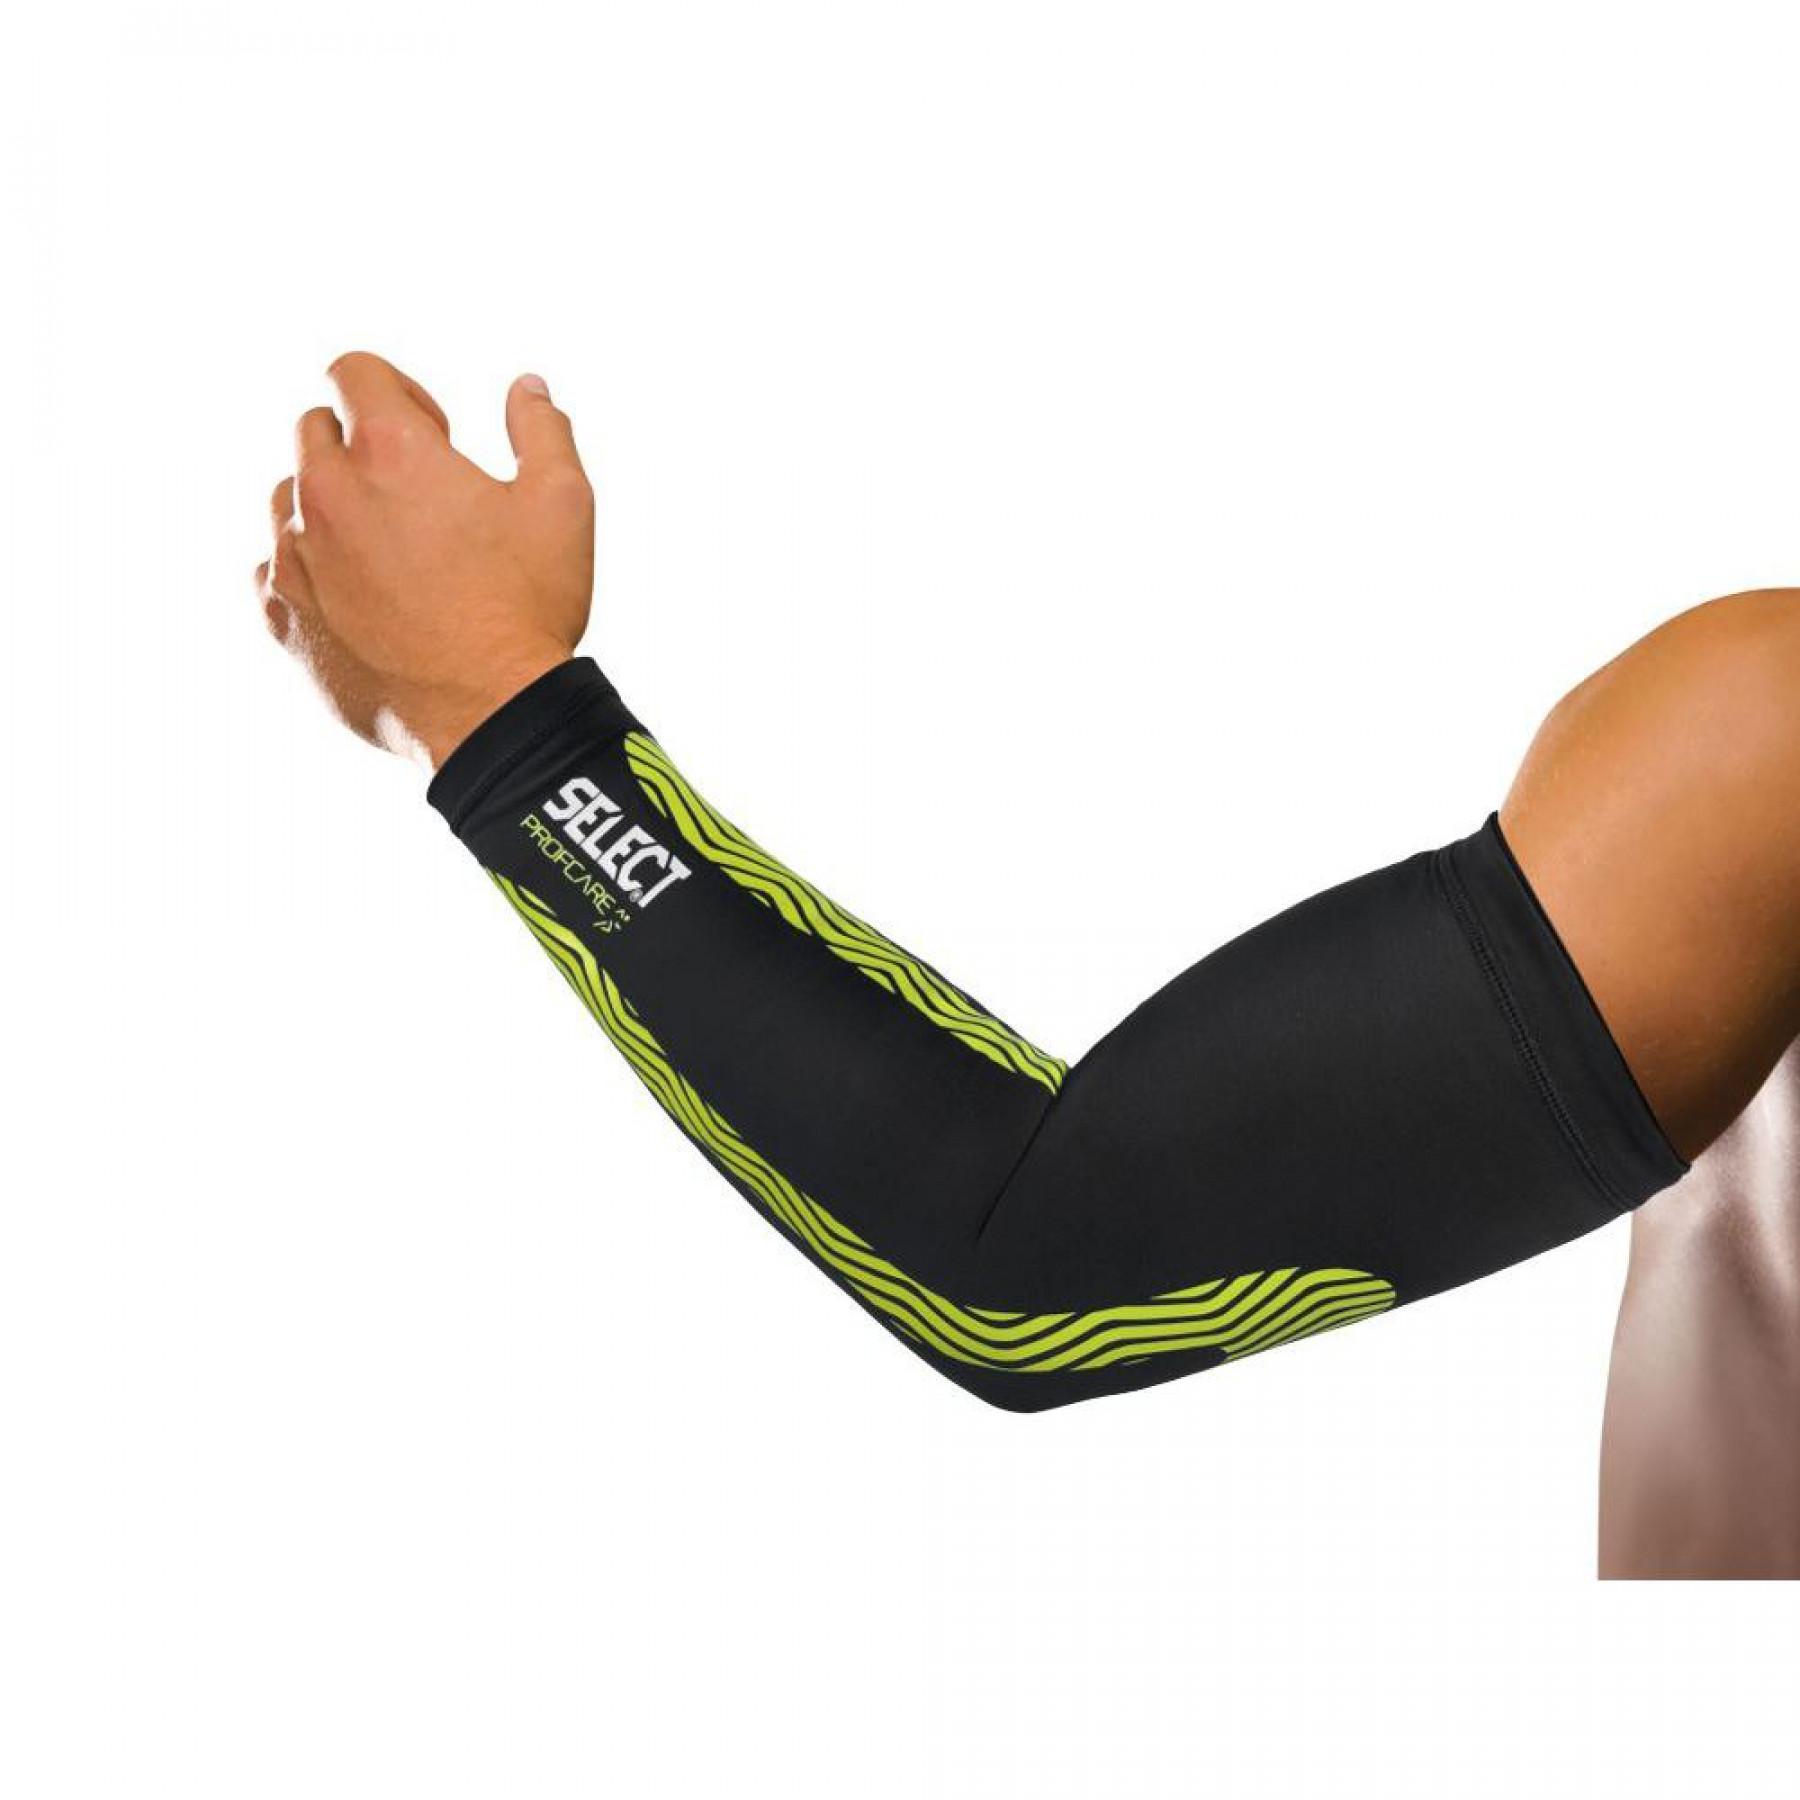 Women's leg compression sleeve cep compression 3.0 - Select - Brands -  Equipment